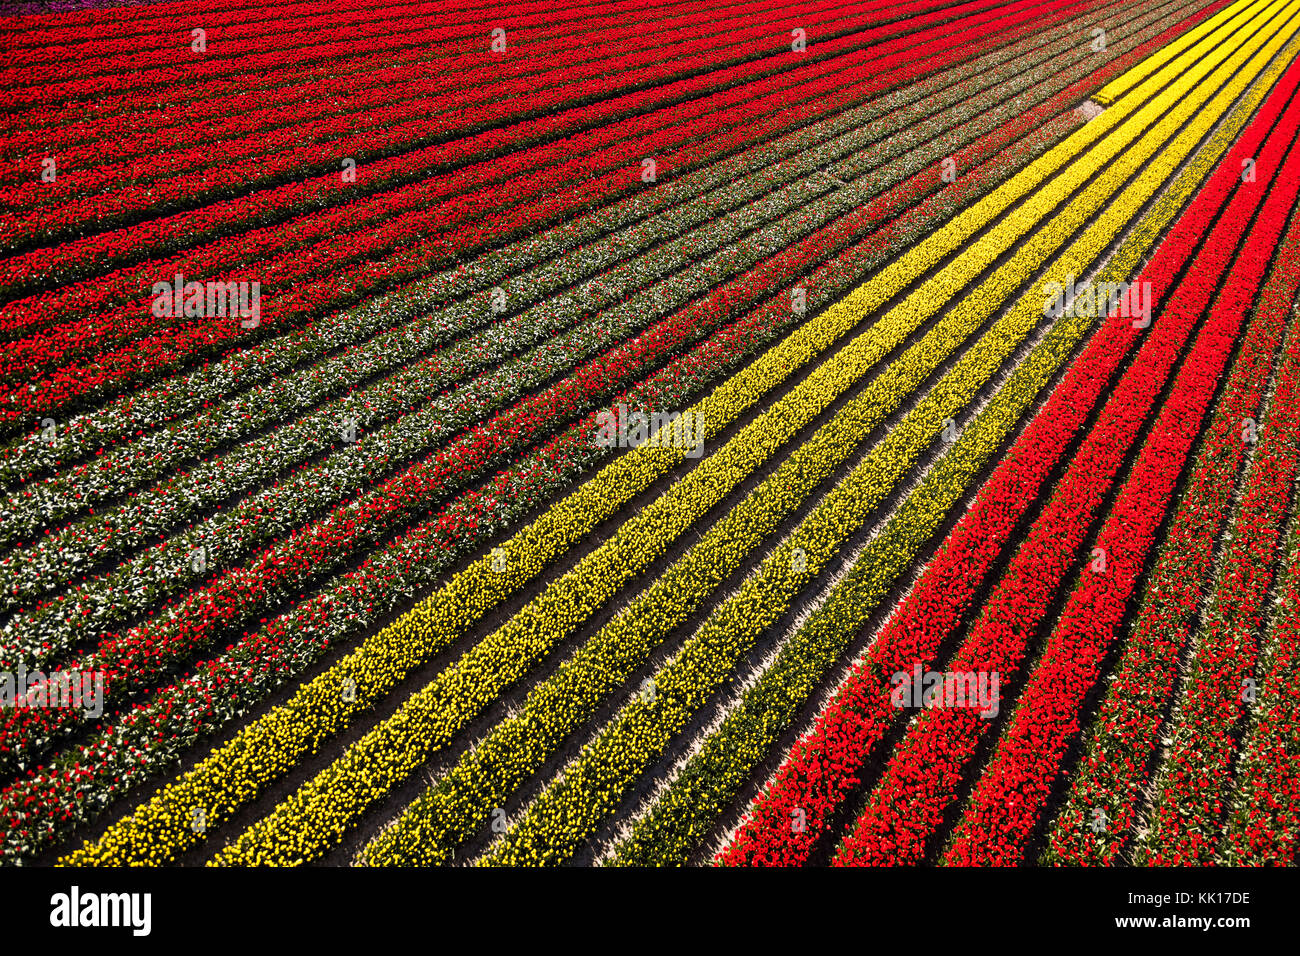 Aerial view of the tulip fields in North Holland, The Netherlands Stock Photo